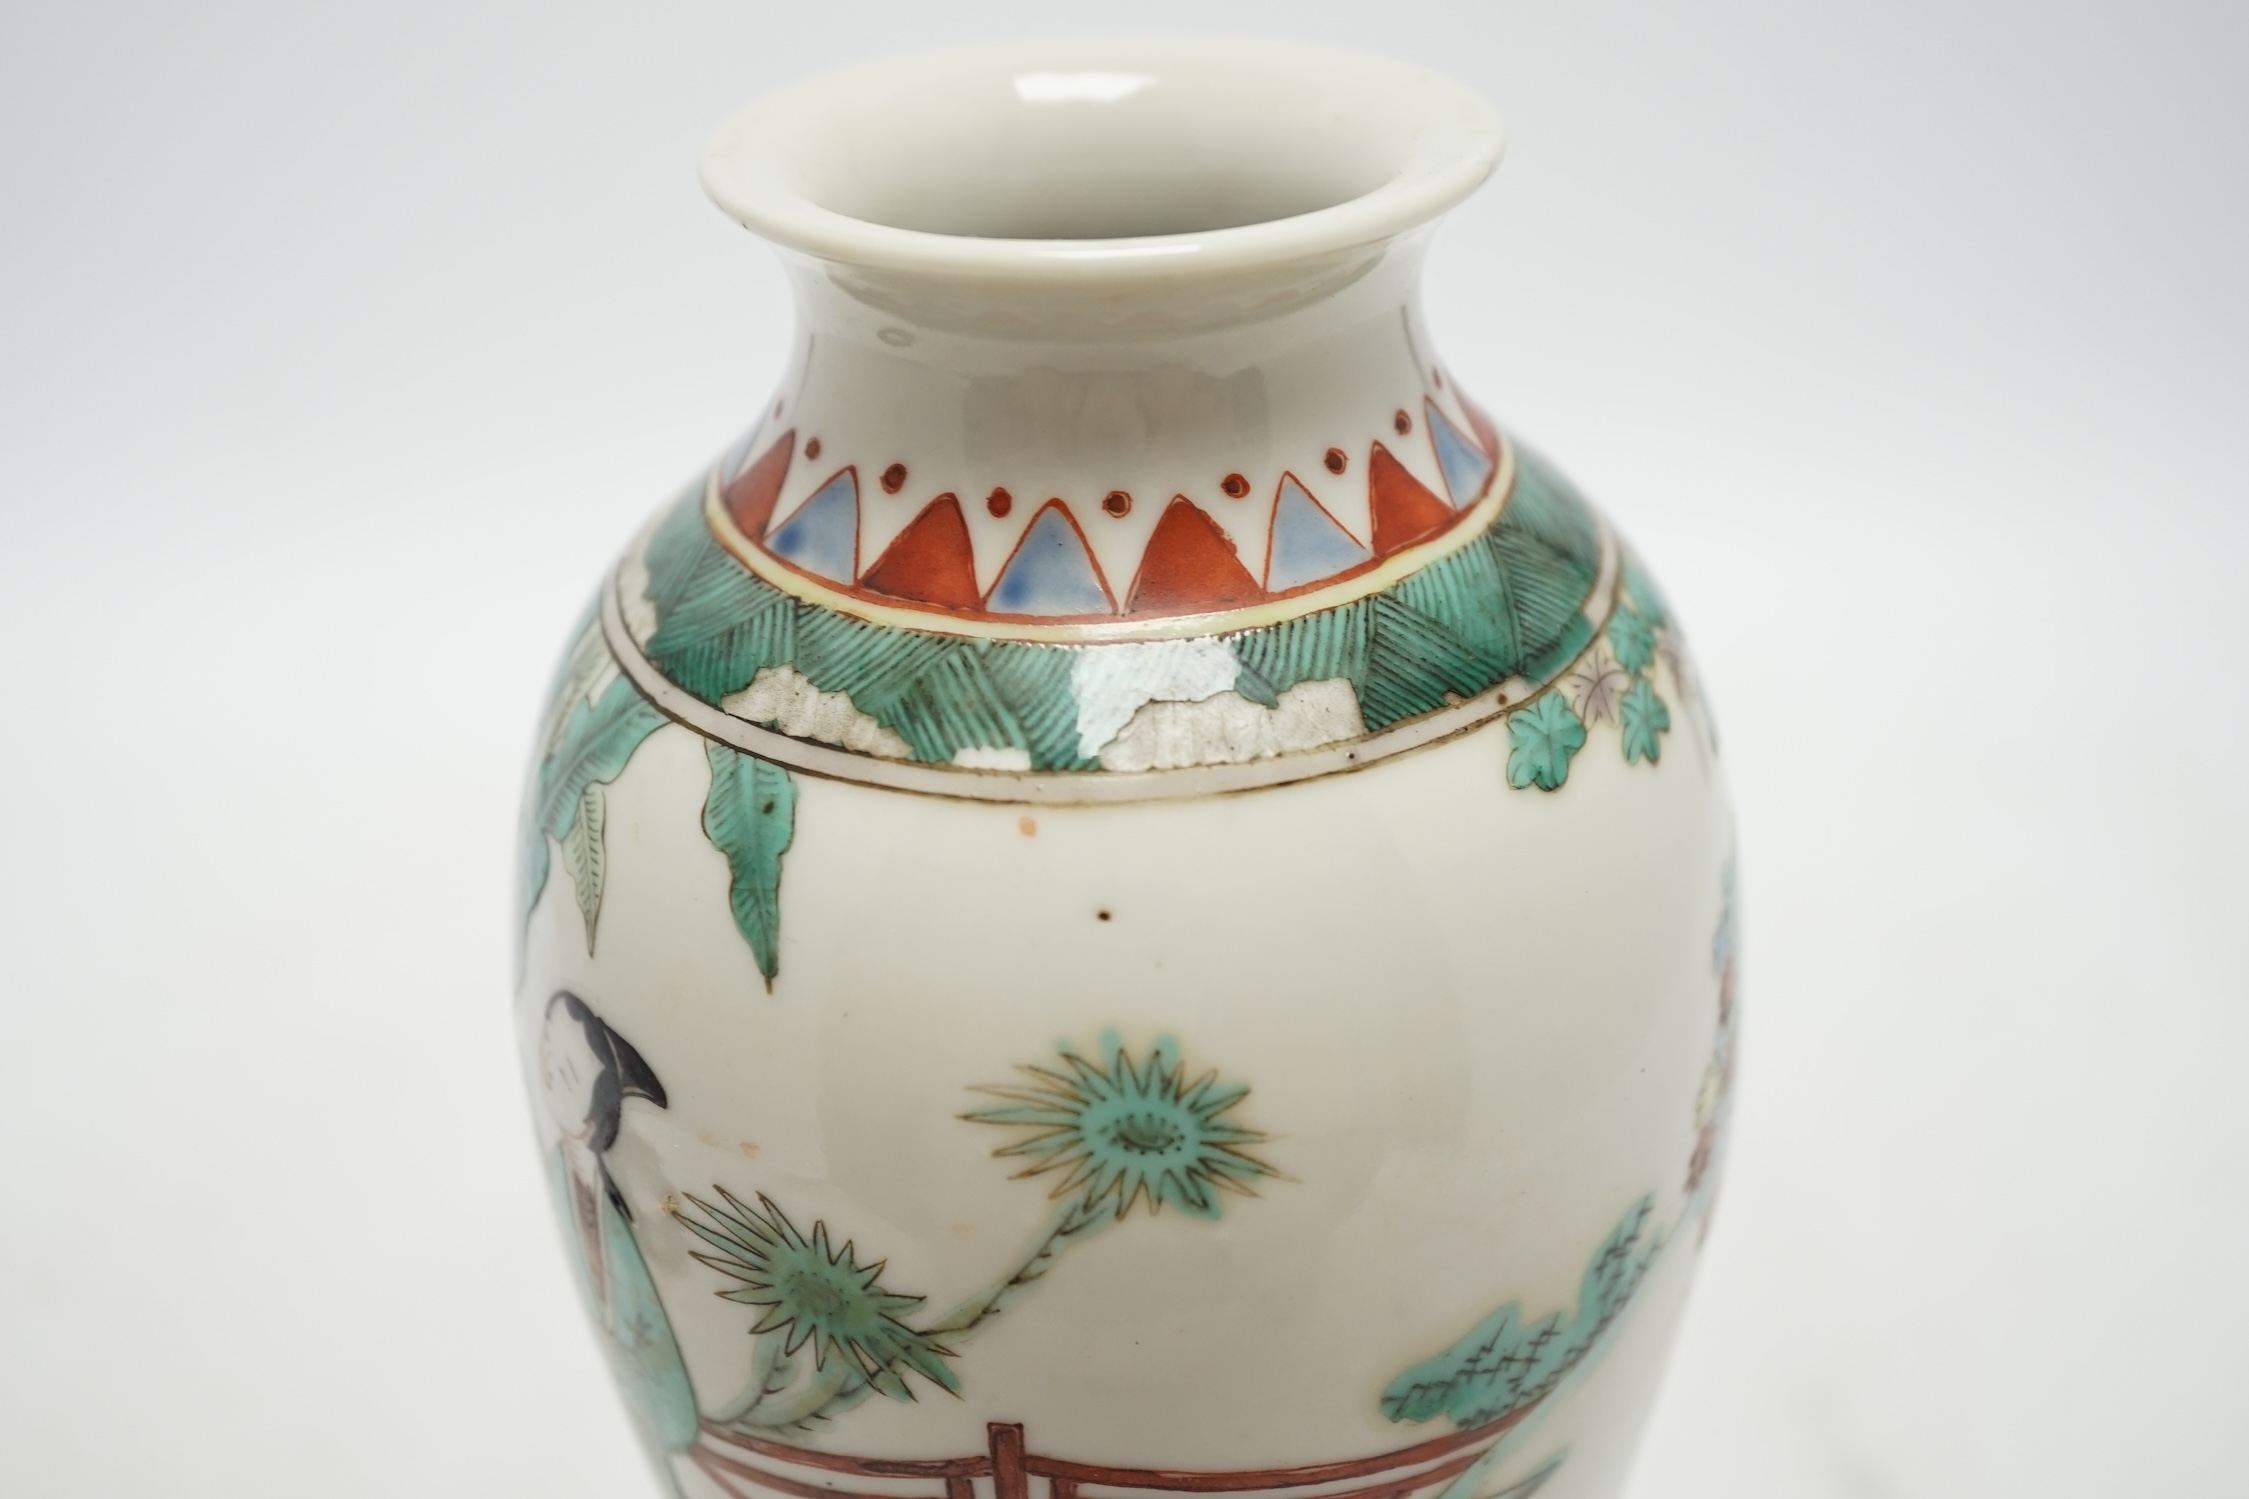 A 19th century Chinese porcelain famille verte vase and associated hardwood stand, 23cm high. Condition - good